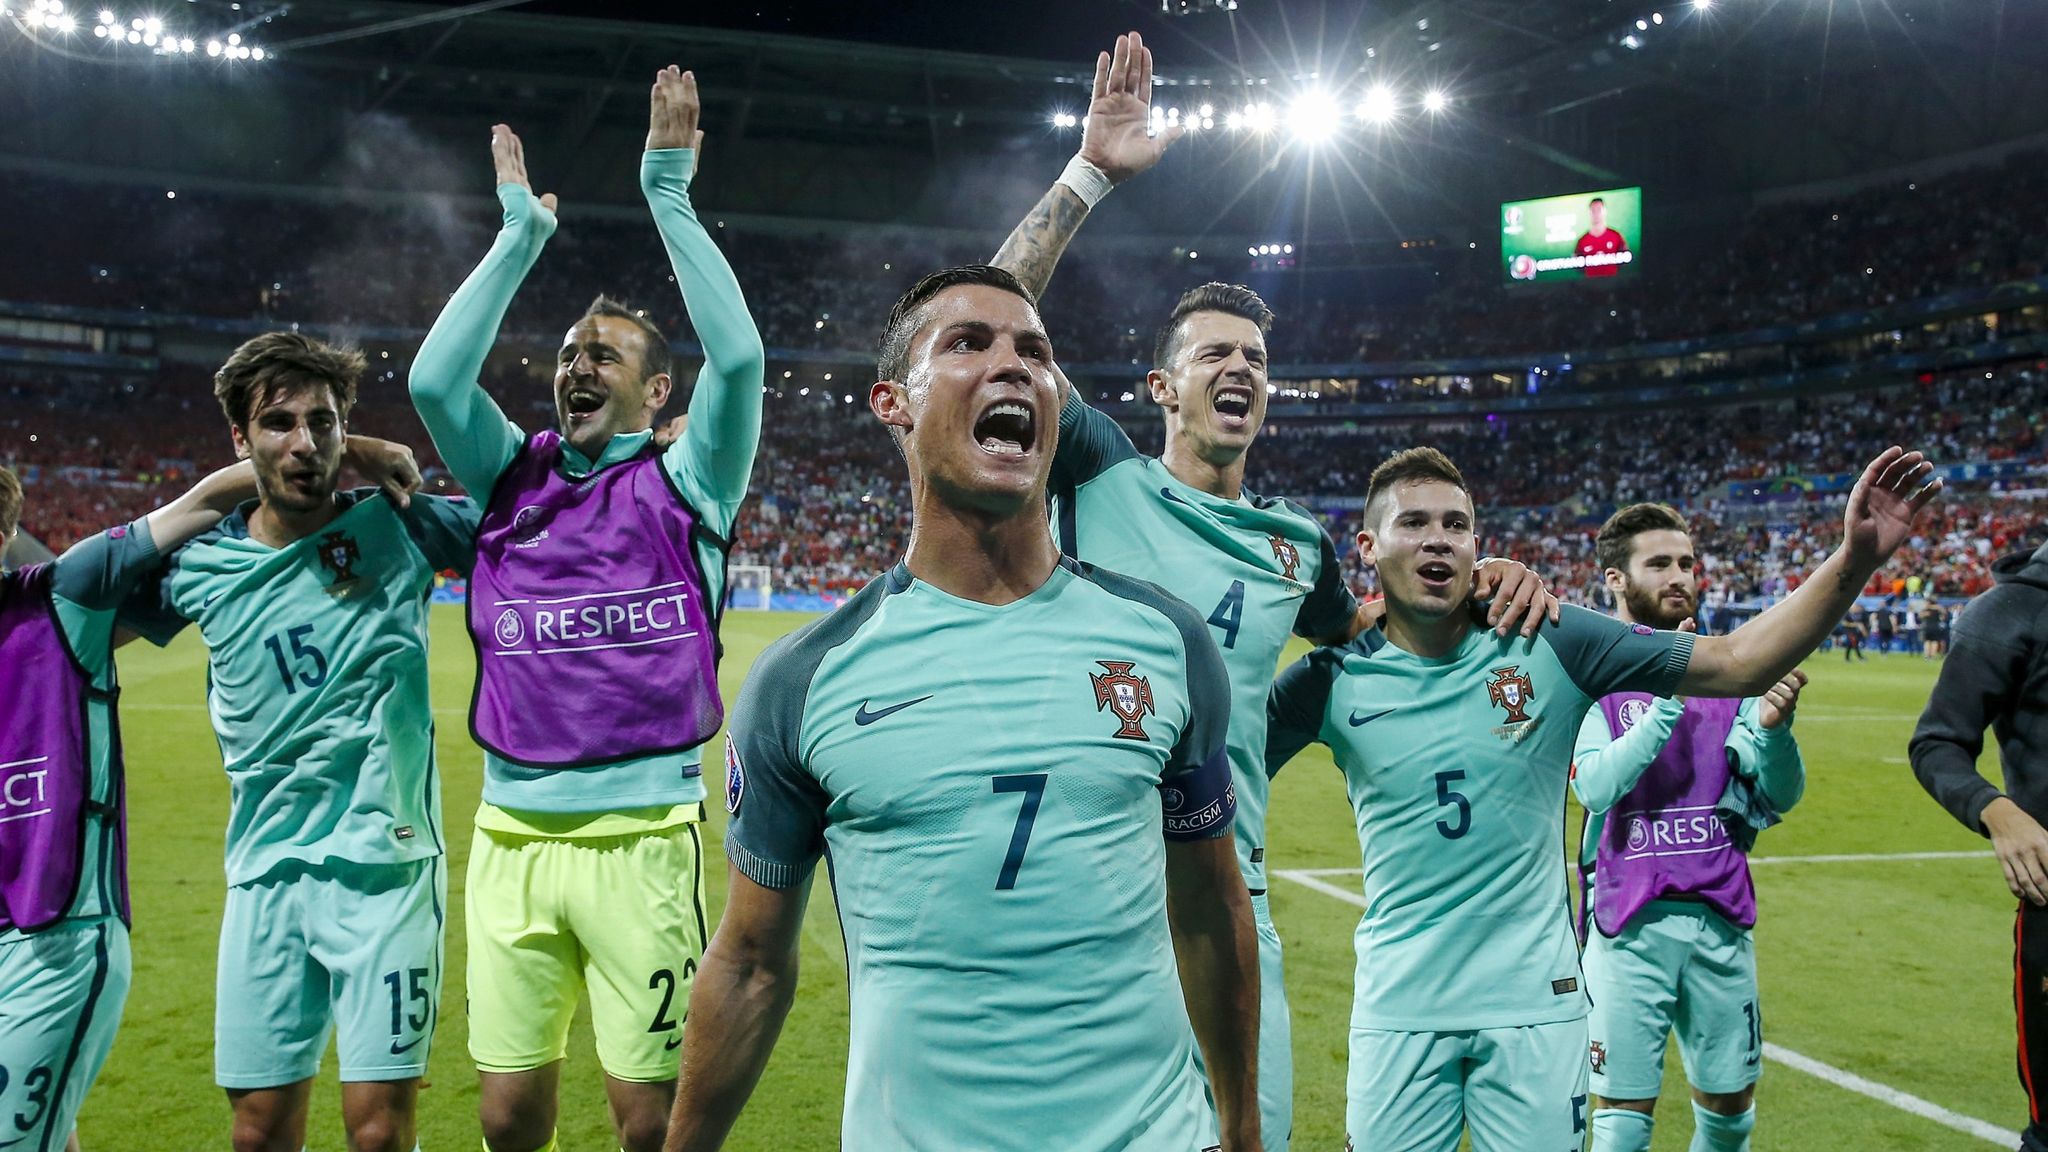 Cristiano Ronaldo S Route To Euro 2016 Final With Portugal Football News Sky Sports